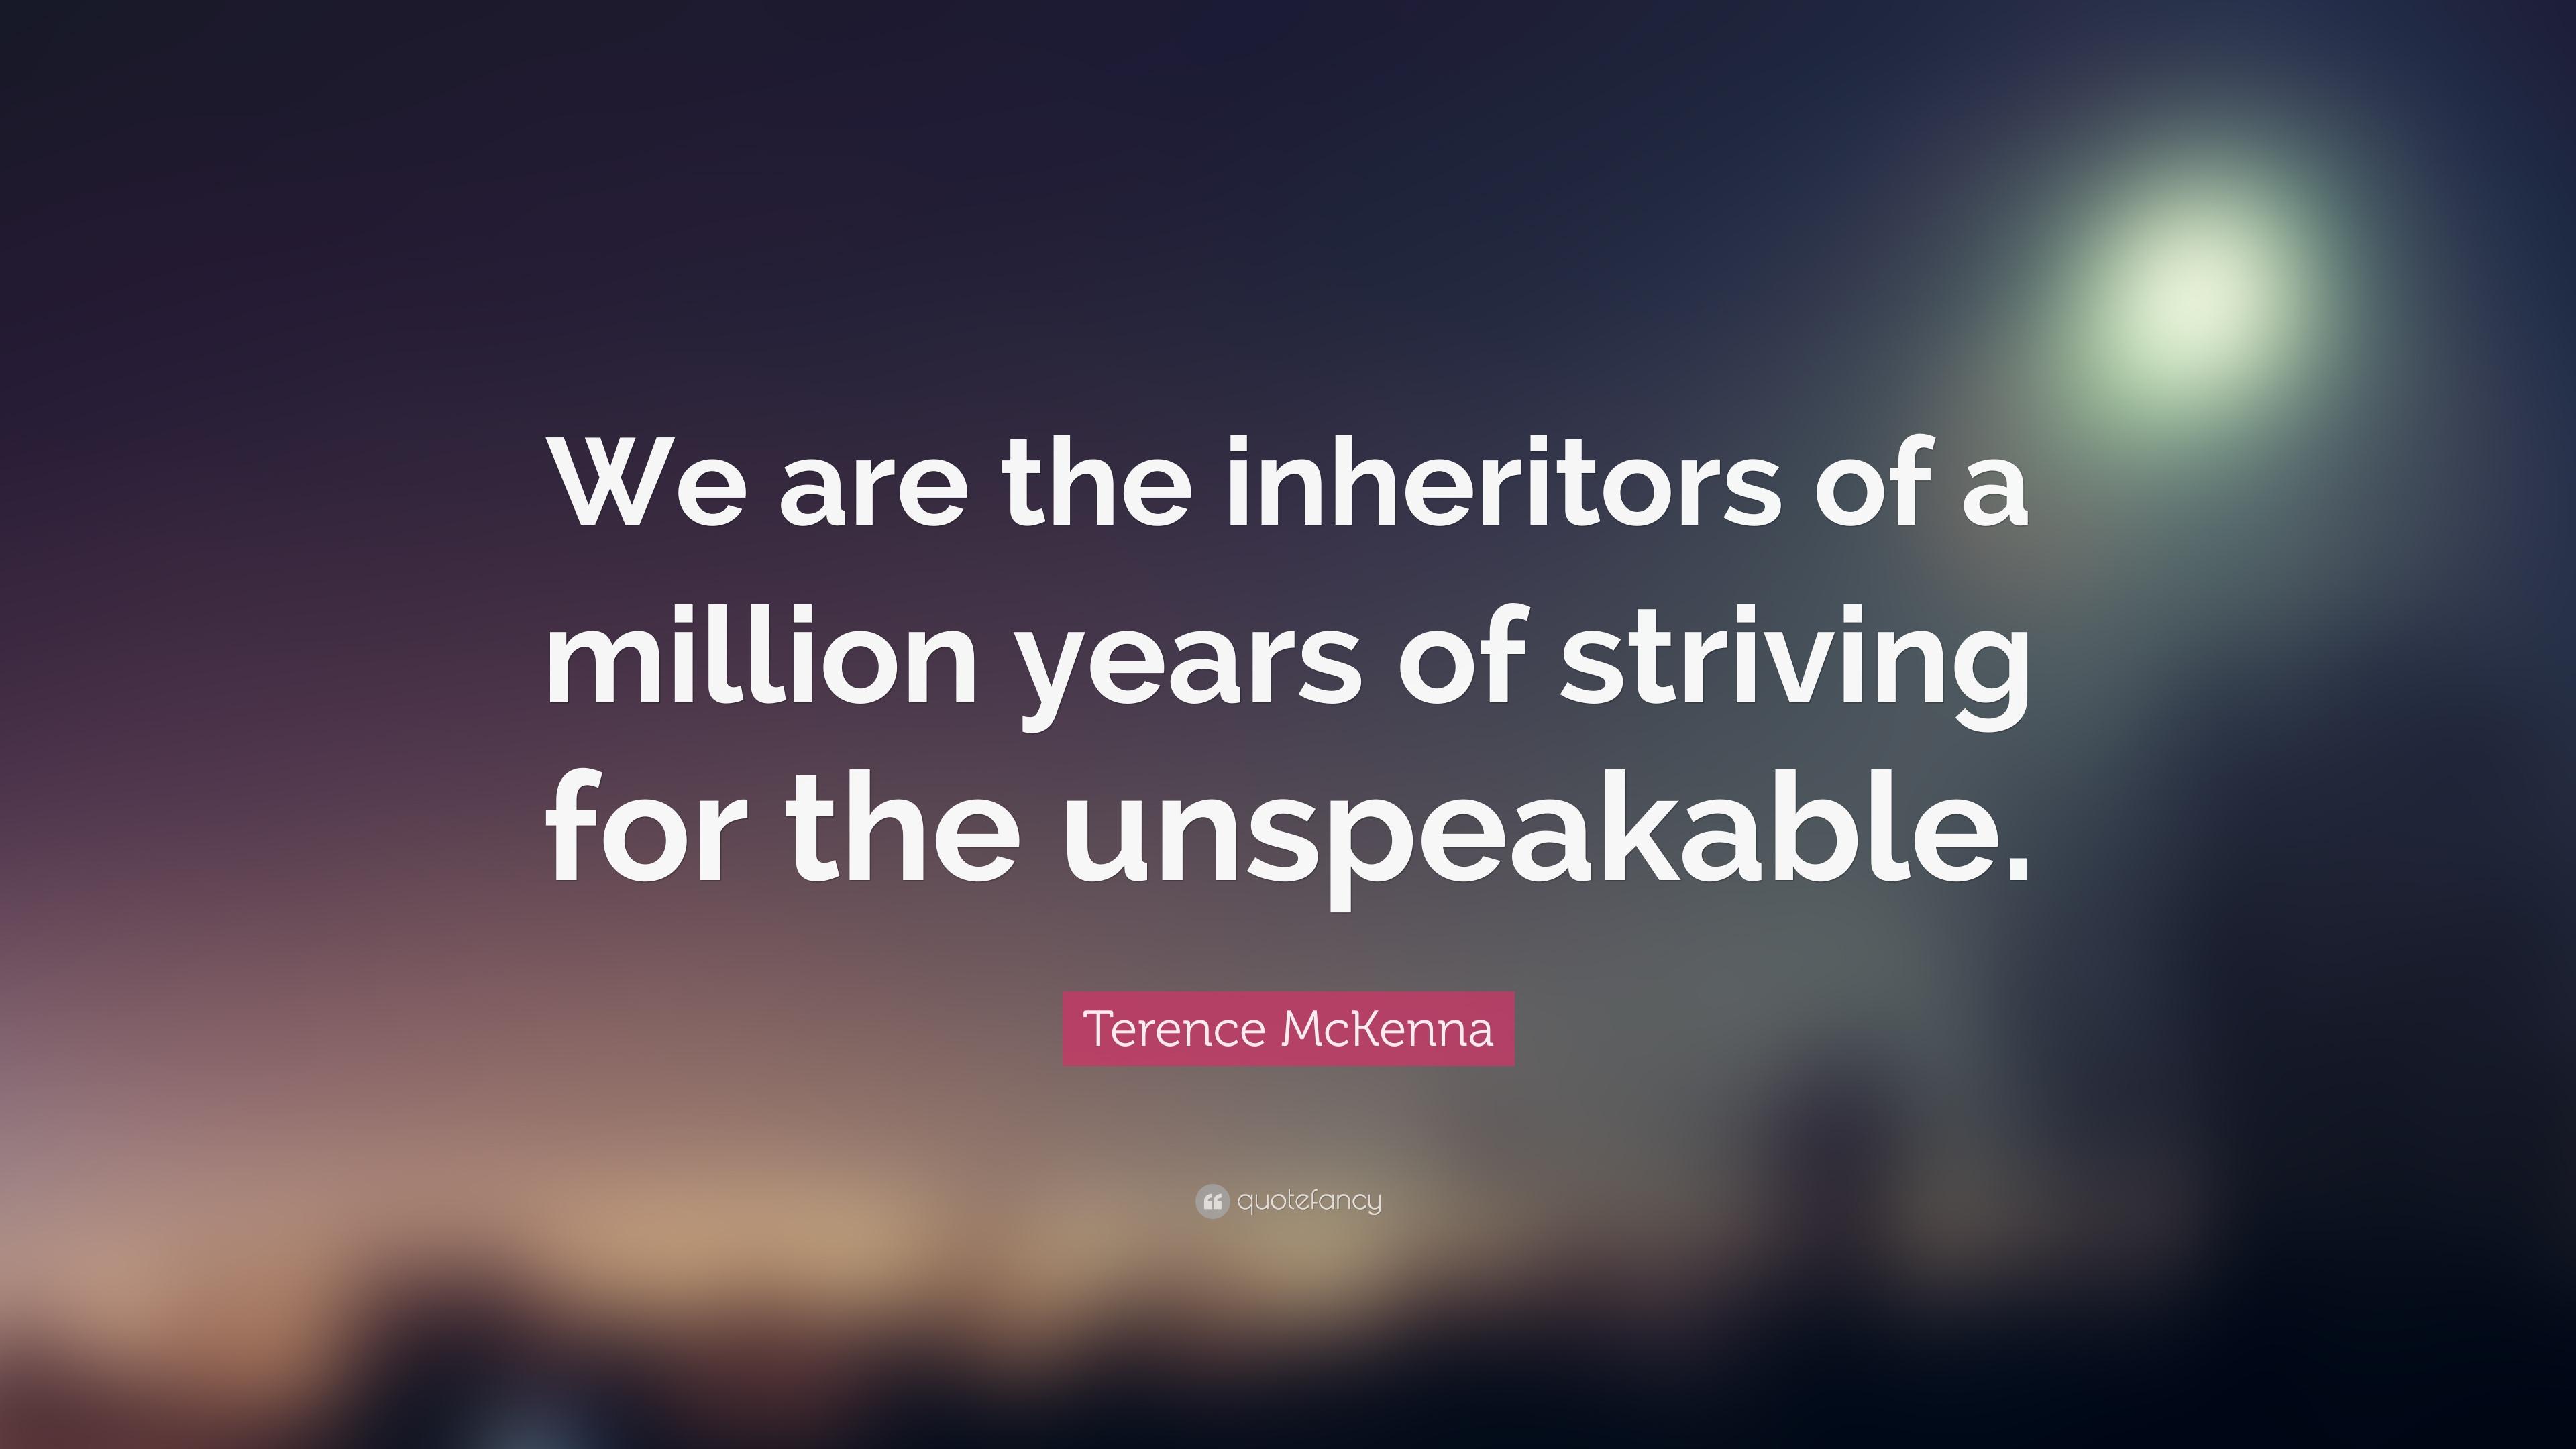 Terence McKenna Quote: “We are the inheritors of a million years